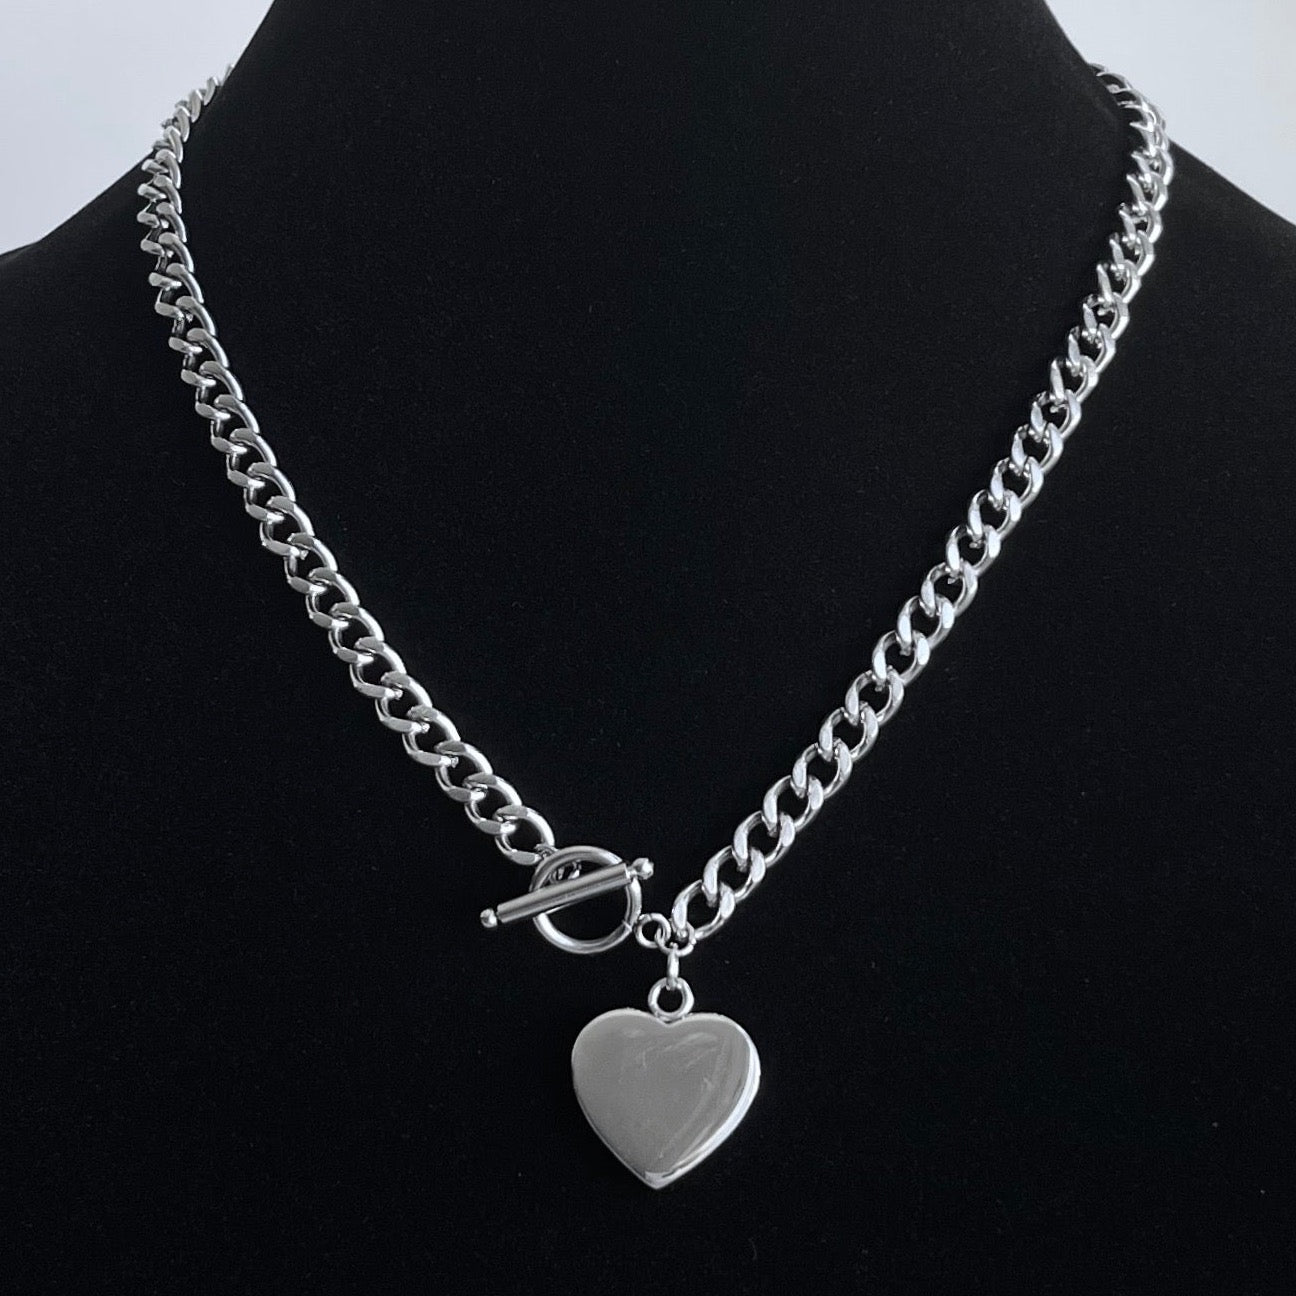 TIFFANY & CO. STERLING SILVER HEART TAG TOGGLE NECKLACE 16